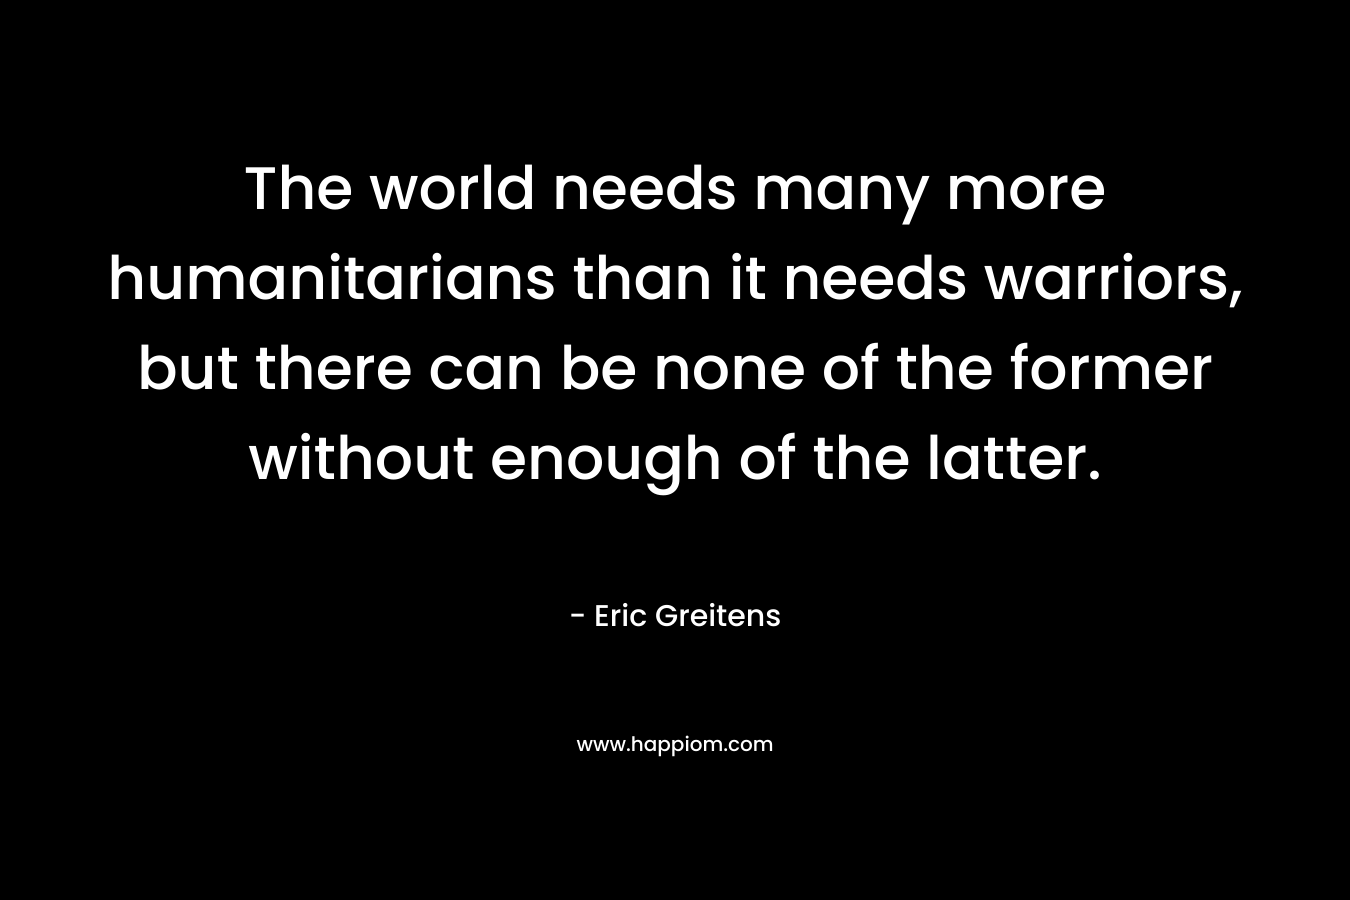 The world needs many more humanitarians than it needs warriors, but there can be none of the former without enough of the latter. – Eric Greitens